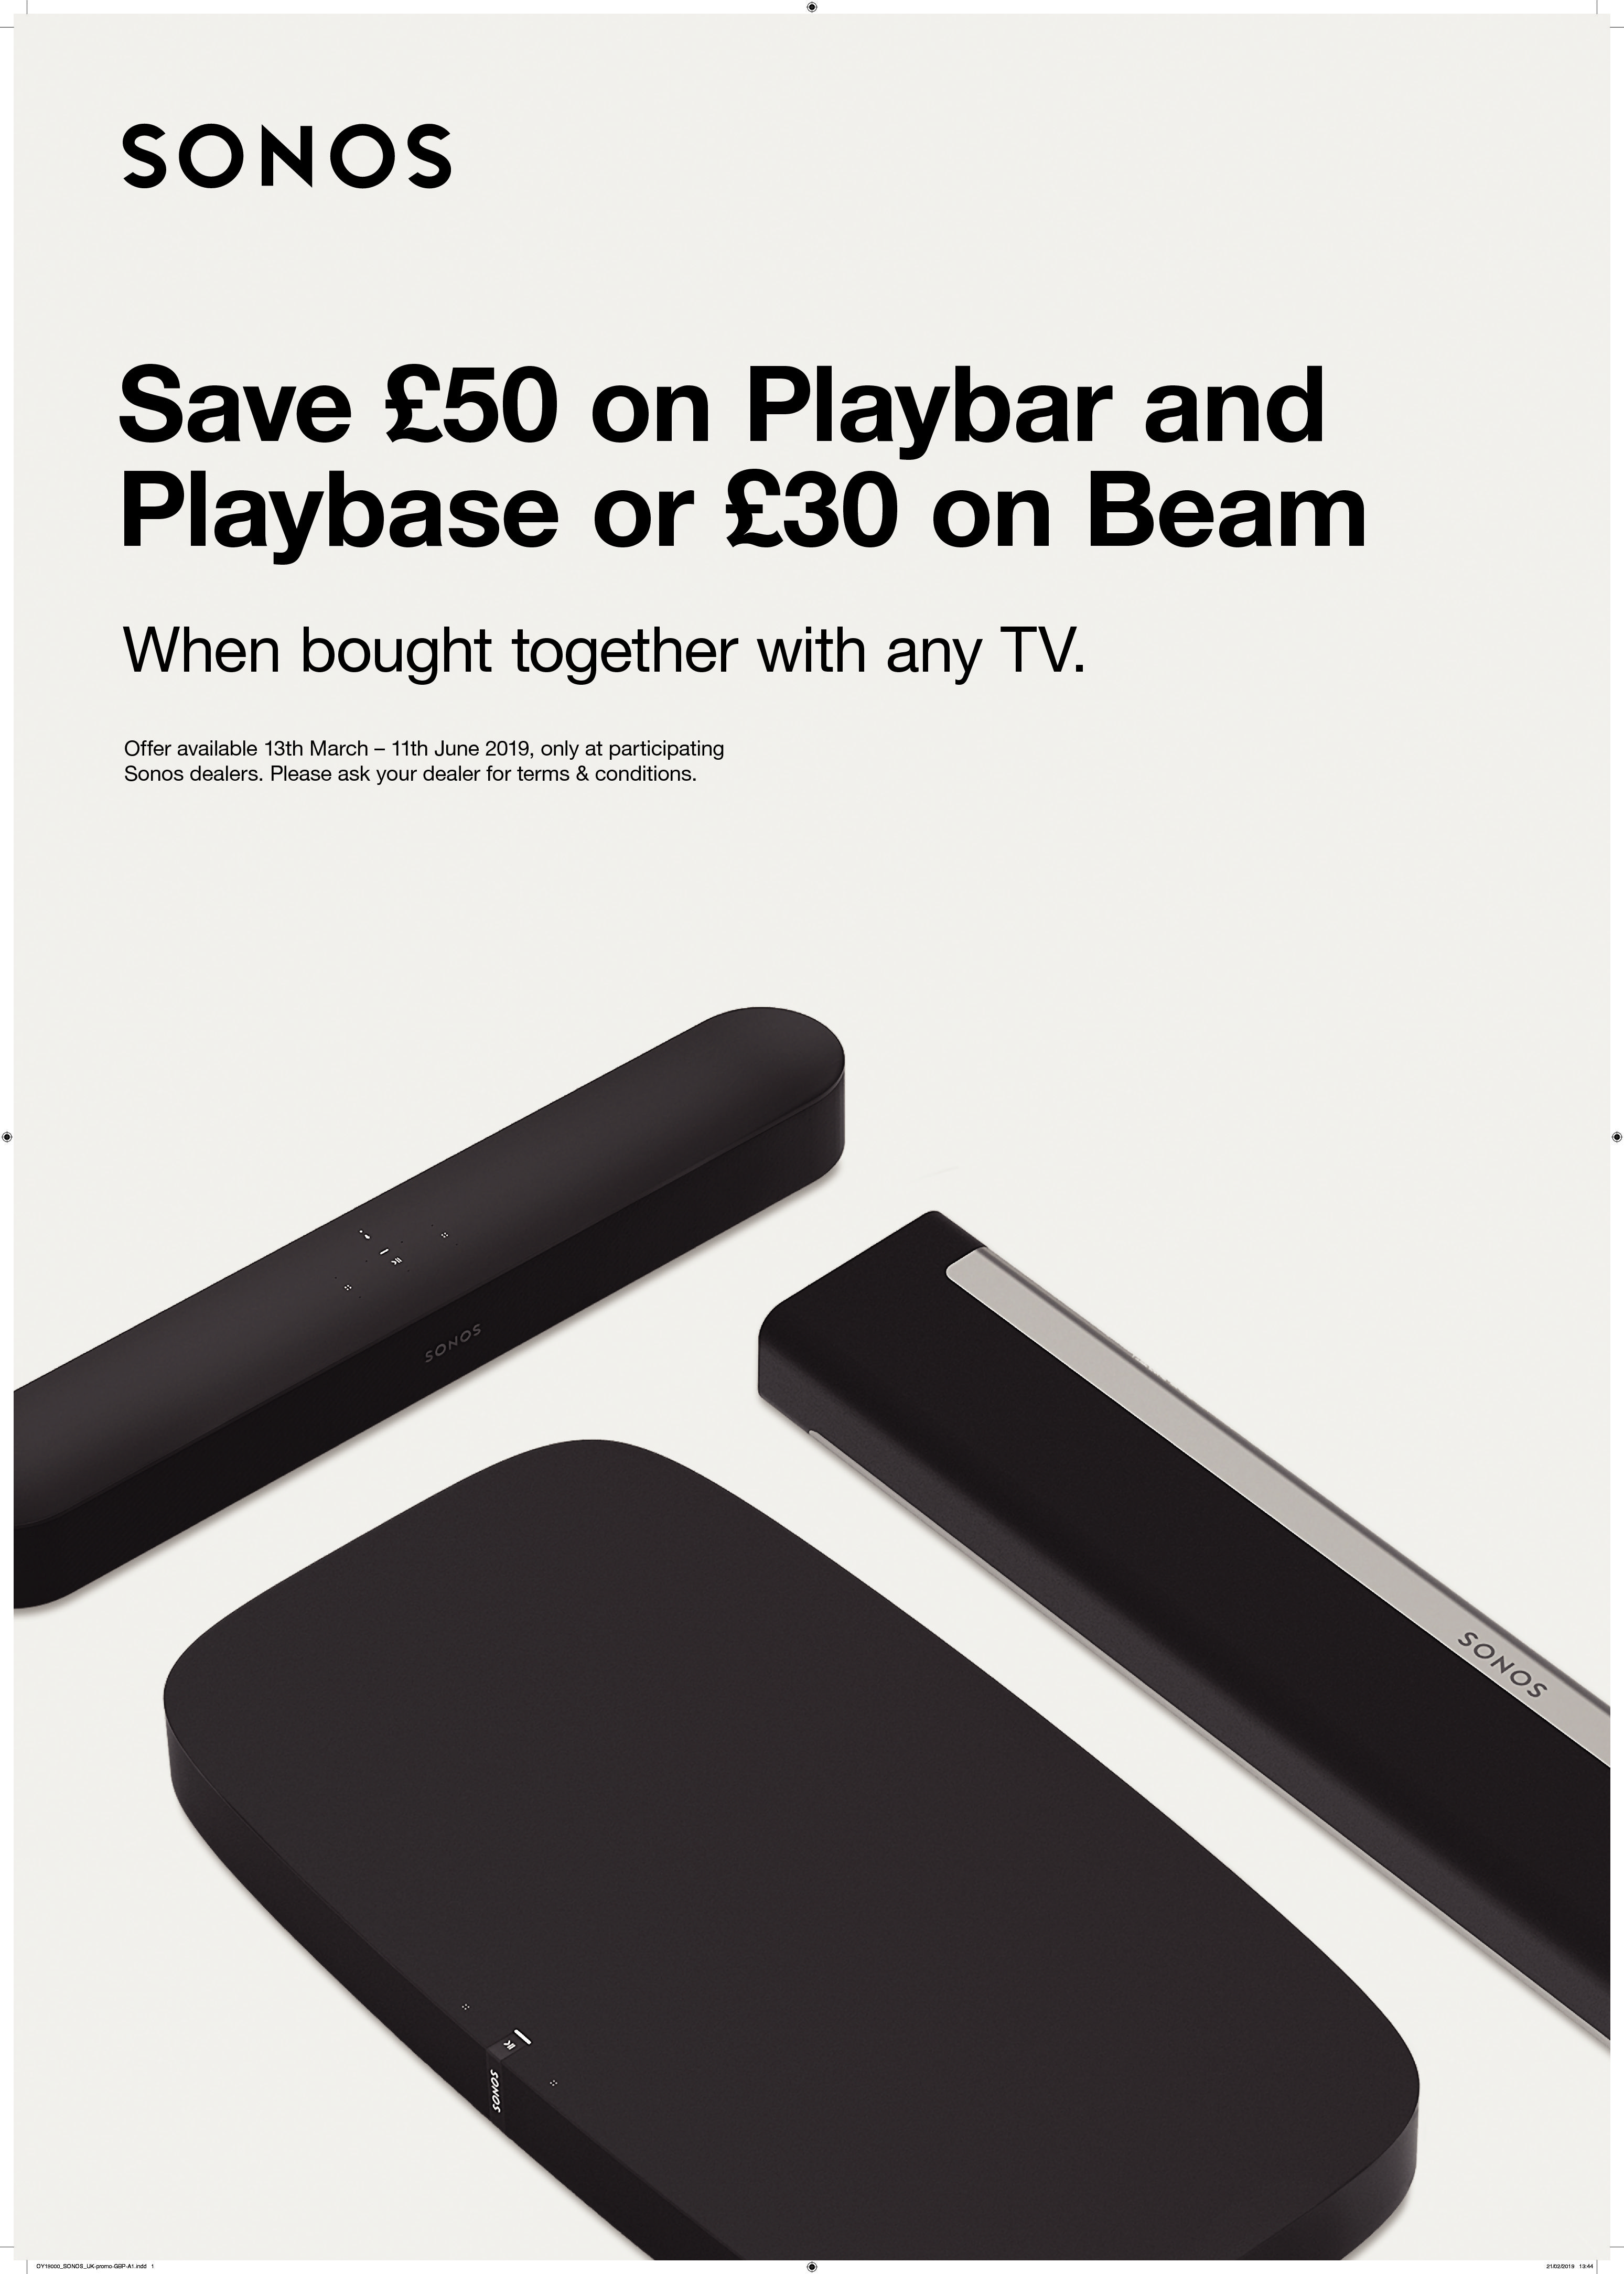 Save up to £50 on Sonos at Moss of Bath